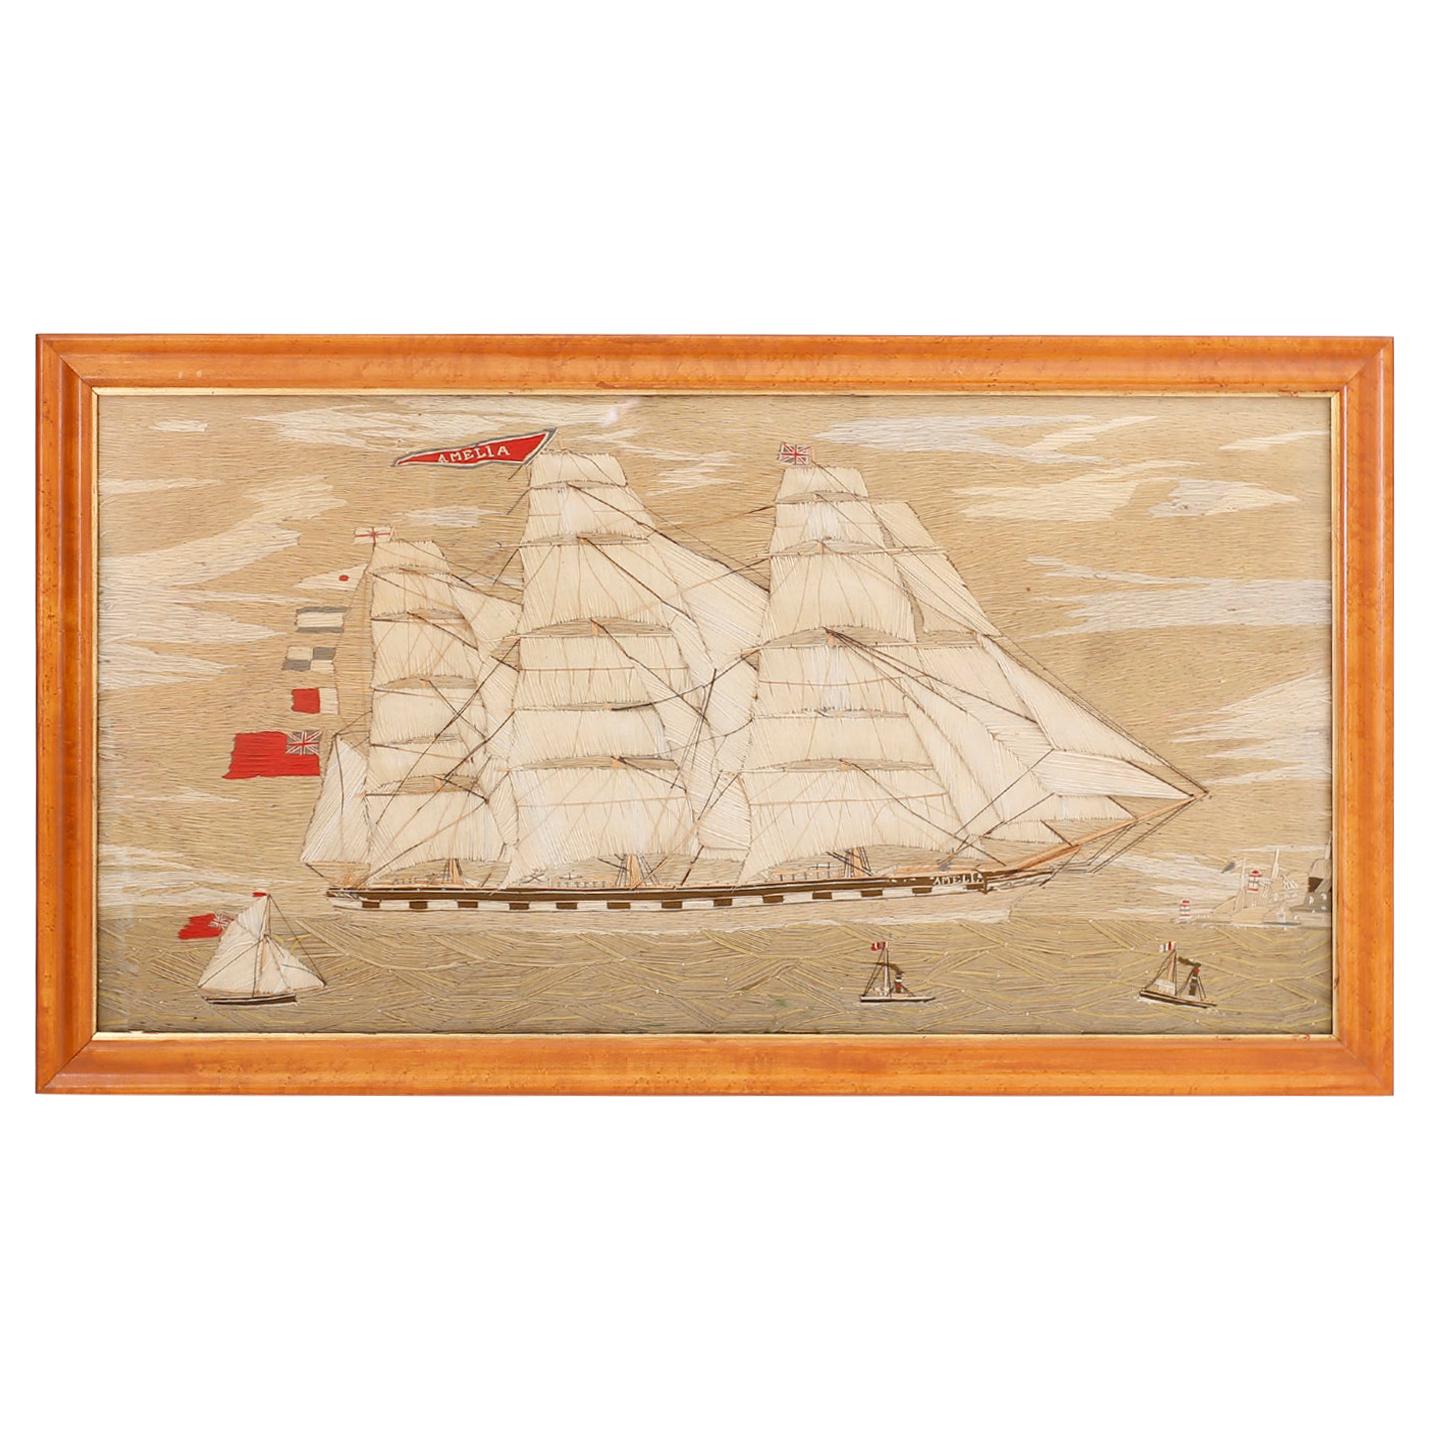 Wool Work 'Woolie' Needlepoint Embroidery of the British Ship Amelia For Sale